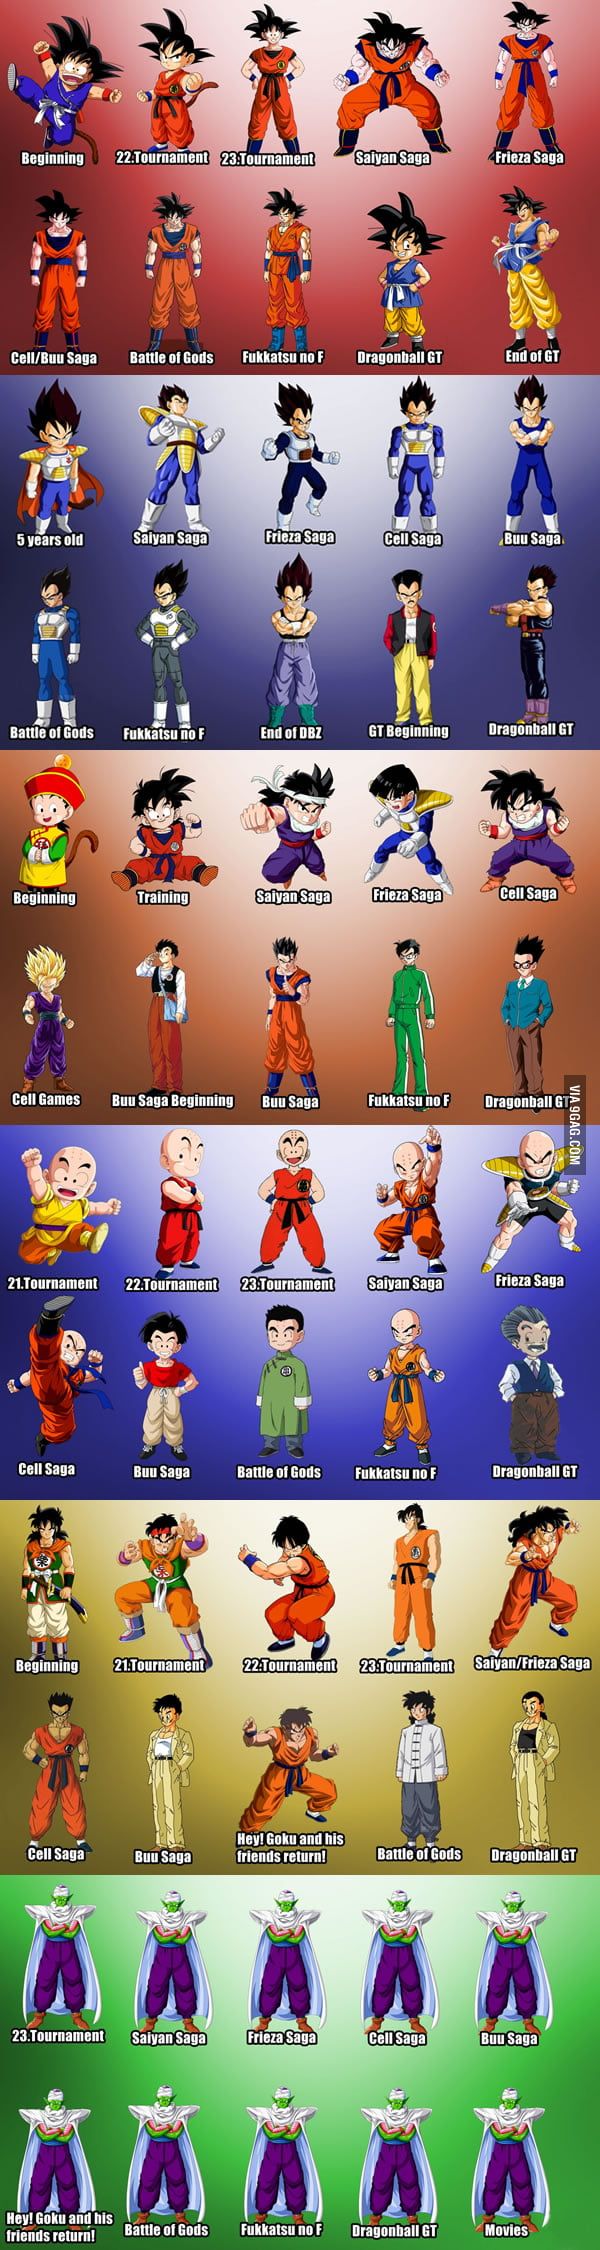 The Evolution Of Dragon Ball Characters - Gaming